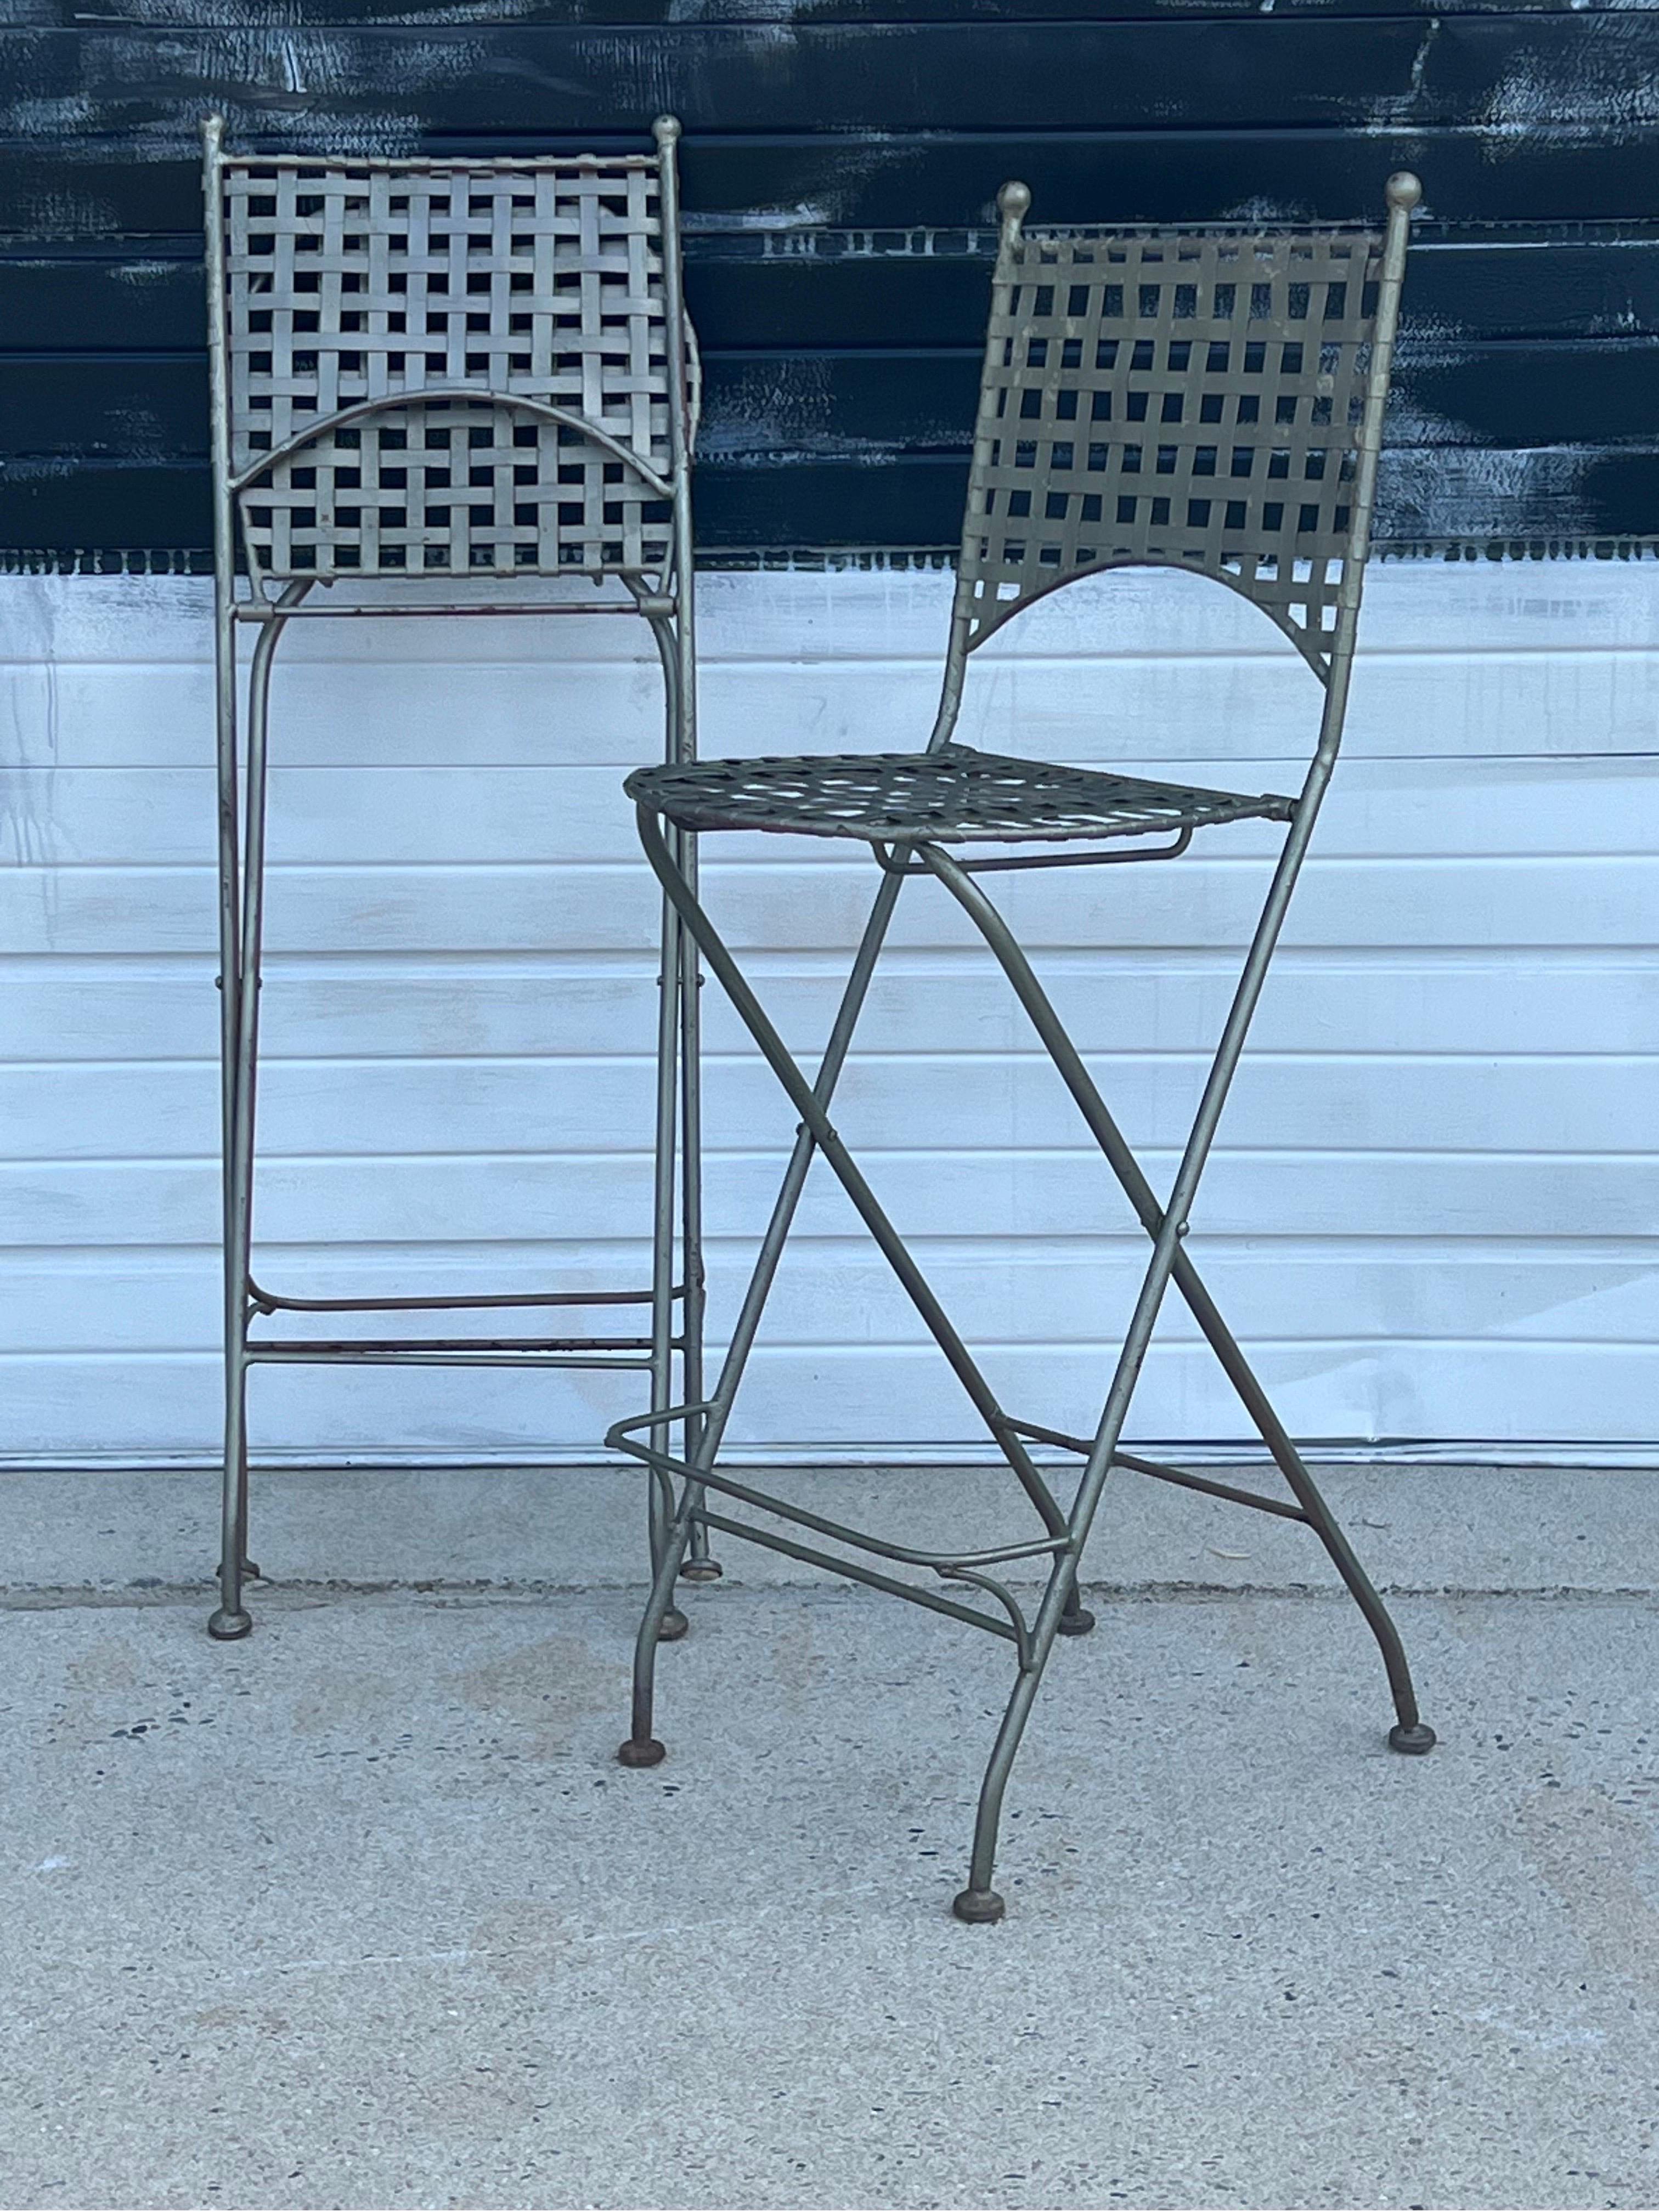 Very cool foldable wrought iron Salterini barstools. Possibly French. Great condition considering age. Patina as expected but the kind you’d expect and like. They’re surprisingly comfy and sit well! Very on trend and striking from every angle.